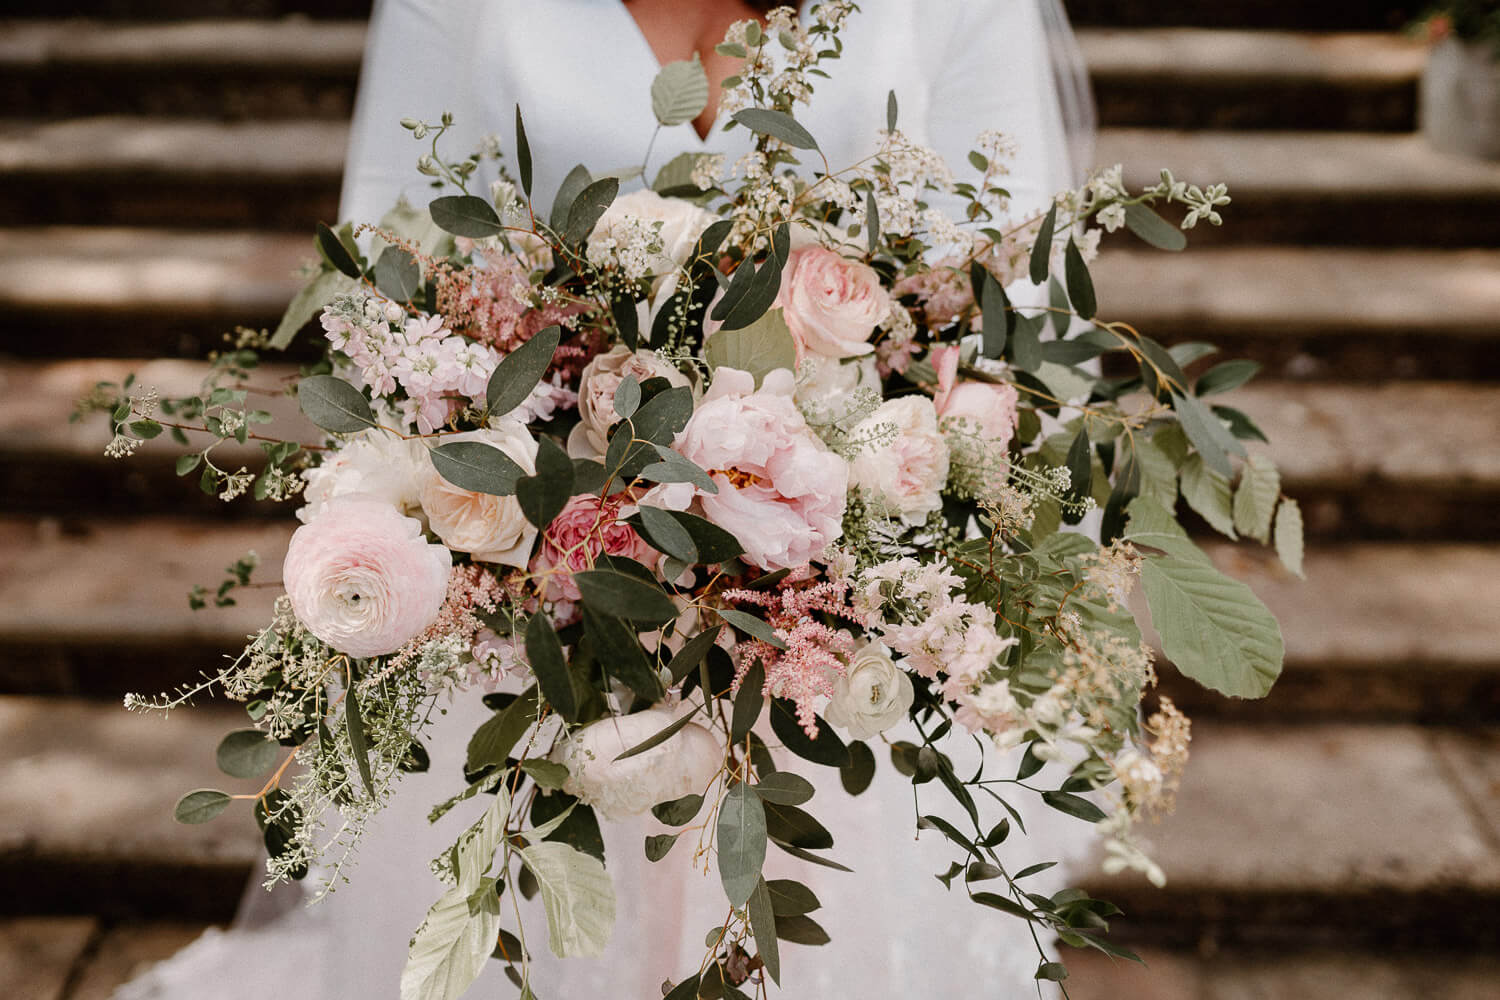 A close up view of a beautiful large bridal bouquet featuring blush pinks and eucalyptus.